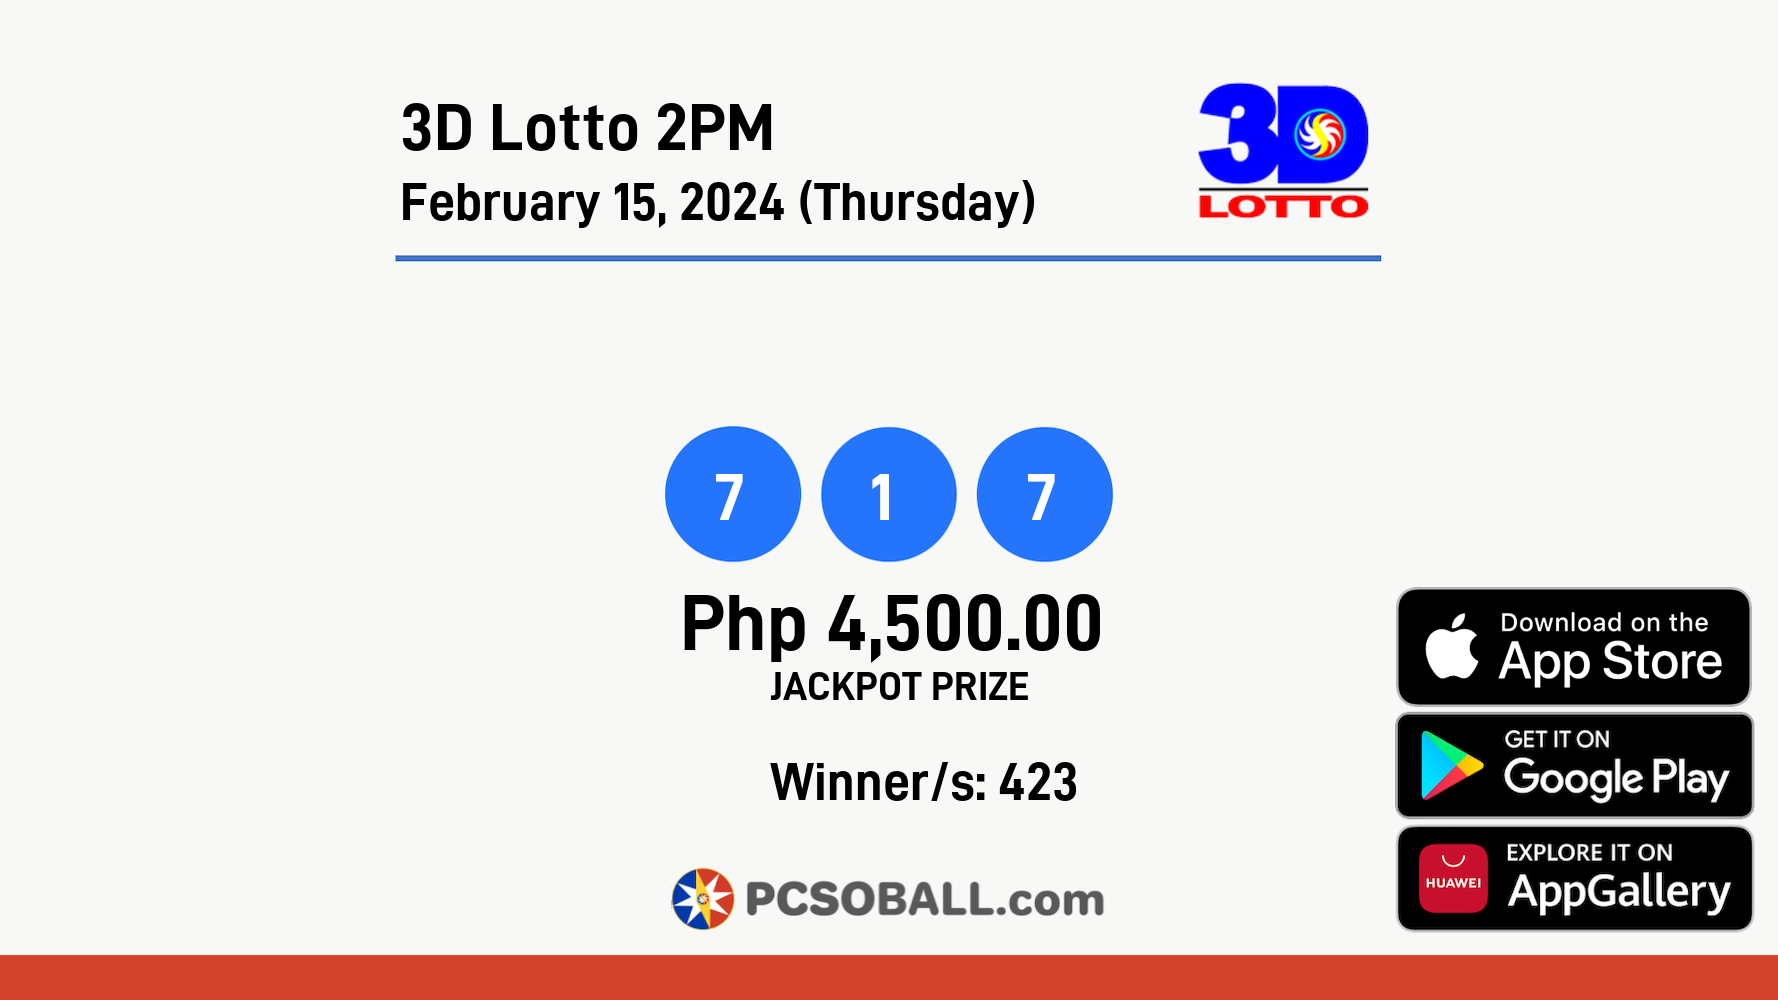 3D Lotto 2PM February 15, 2024 (Thursday) Result